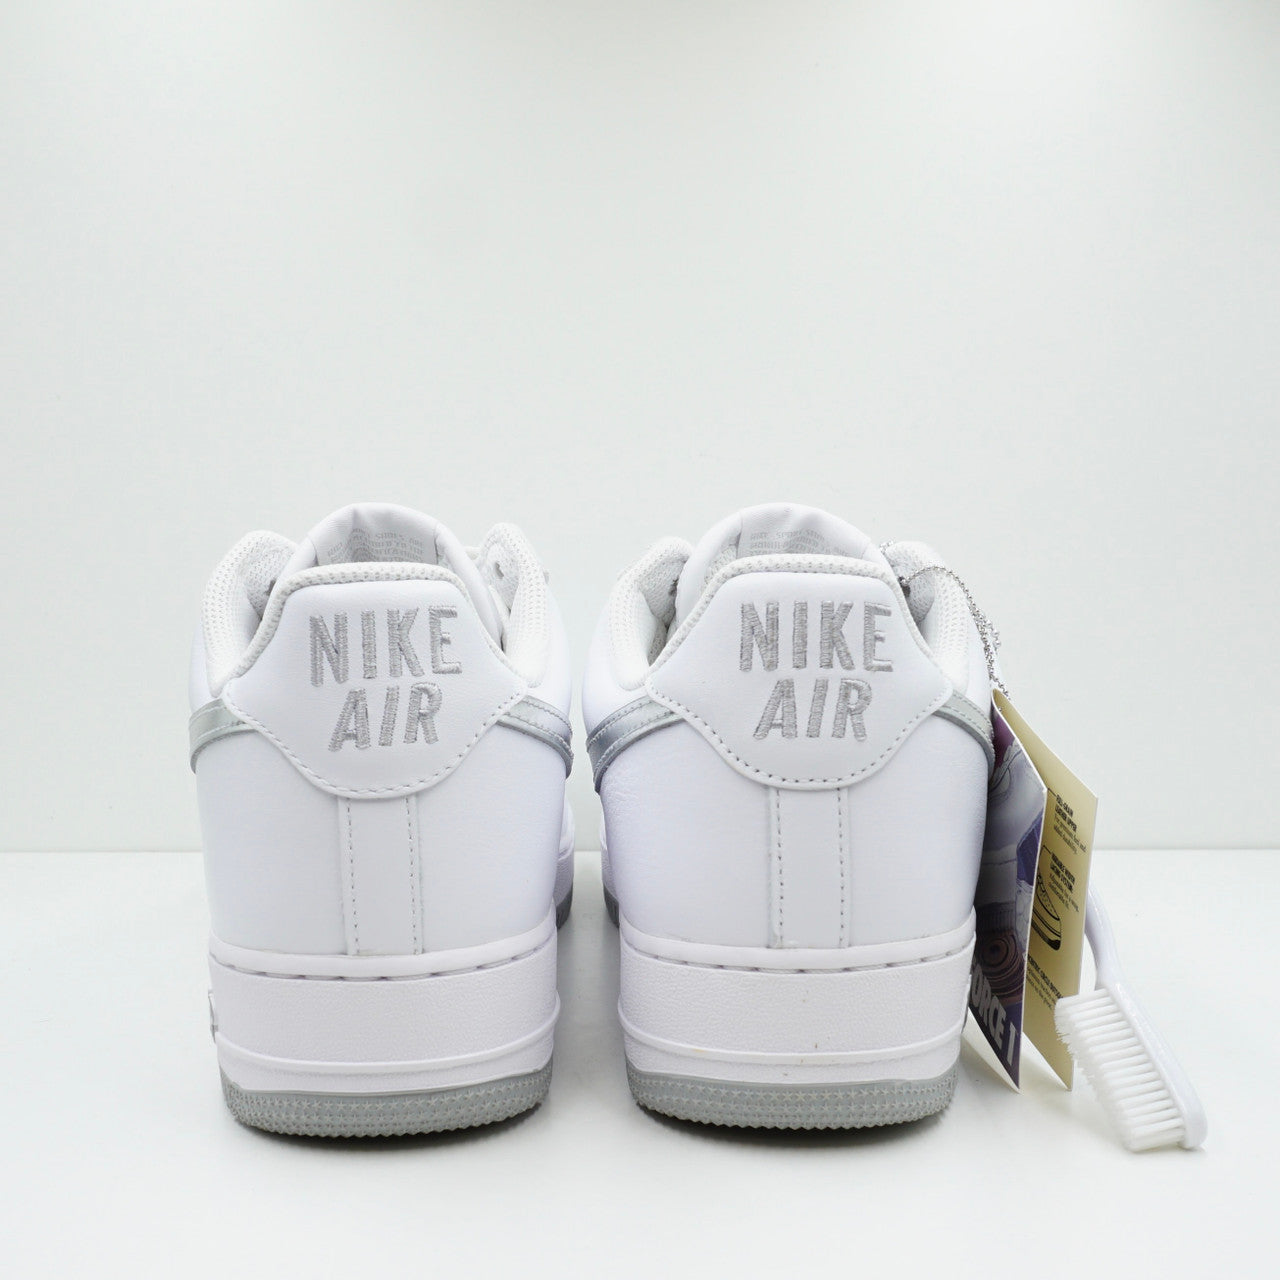 Nike Air Force 1 '07 Low Color Of The Month White Metallic Silver